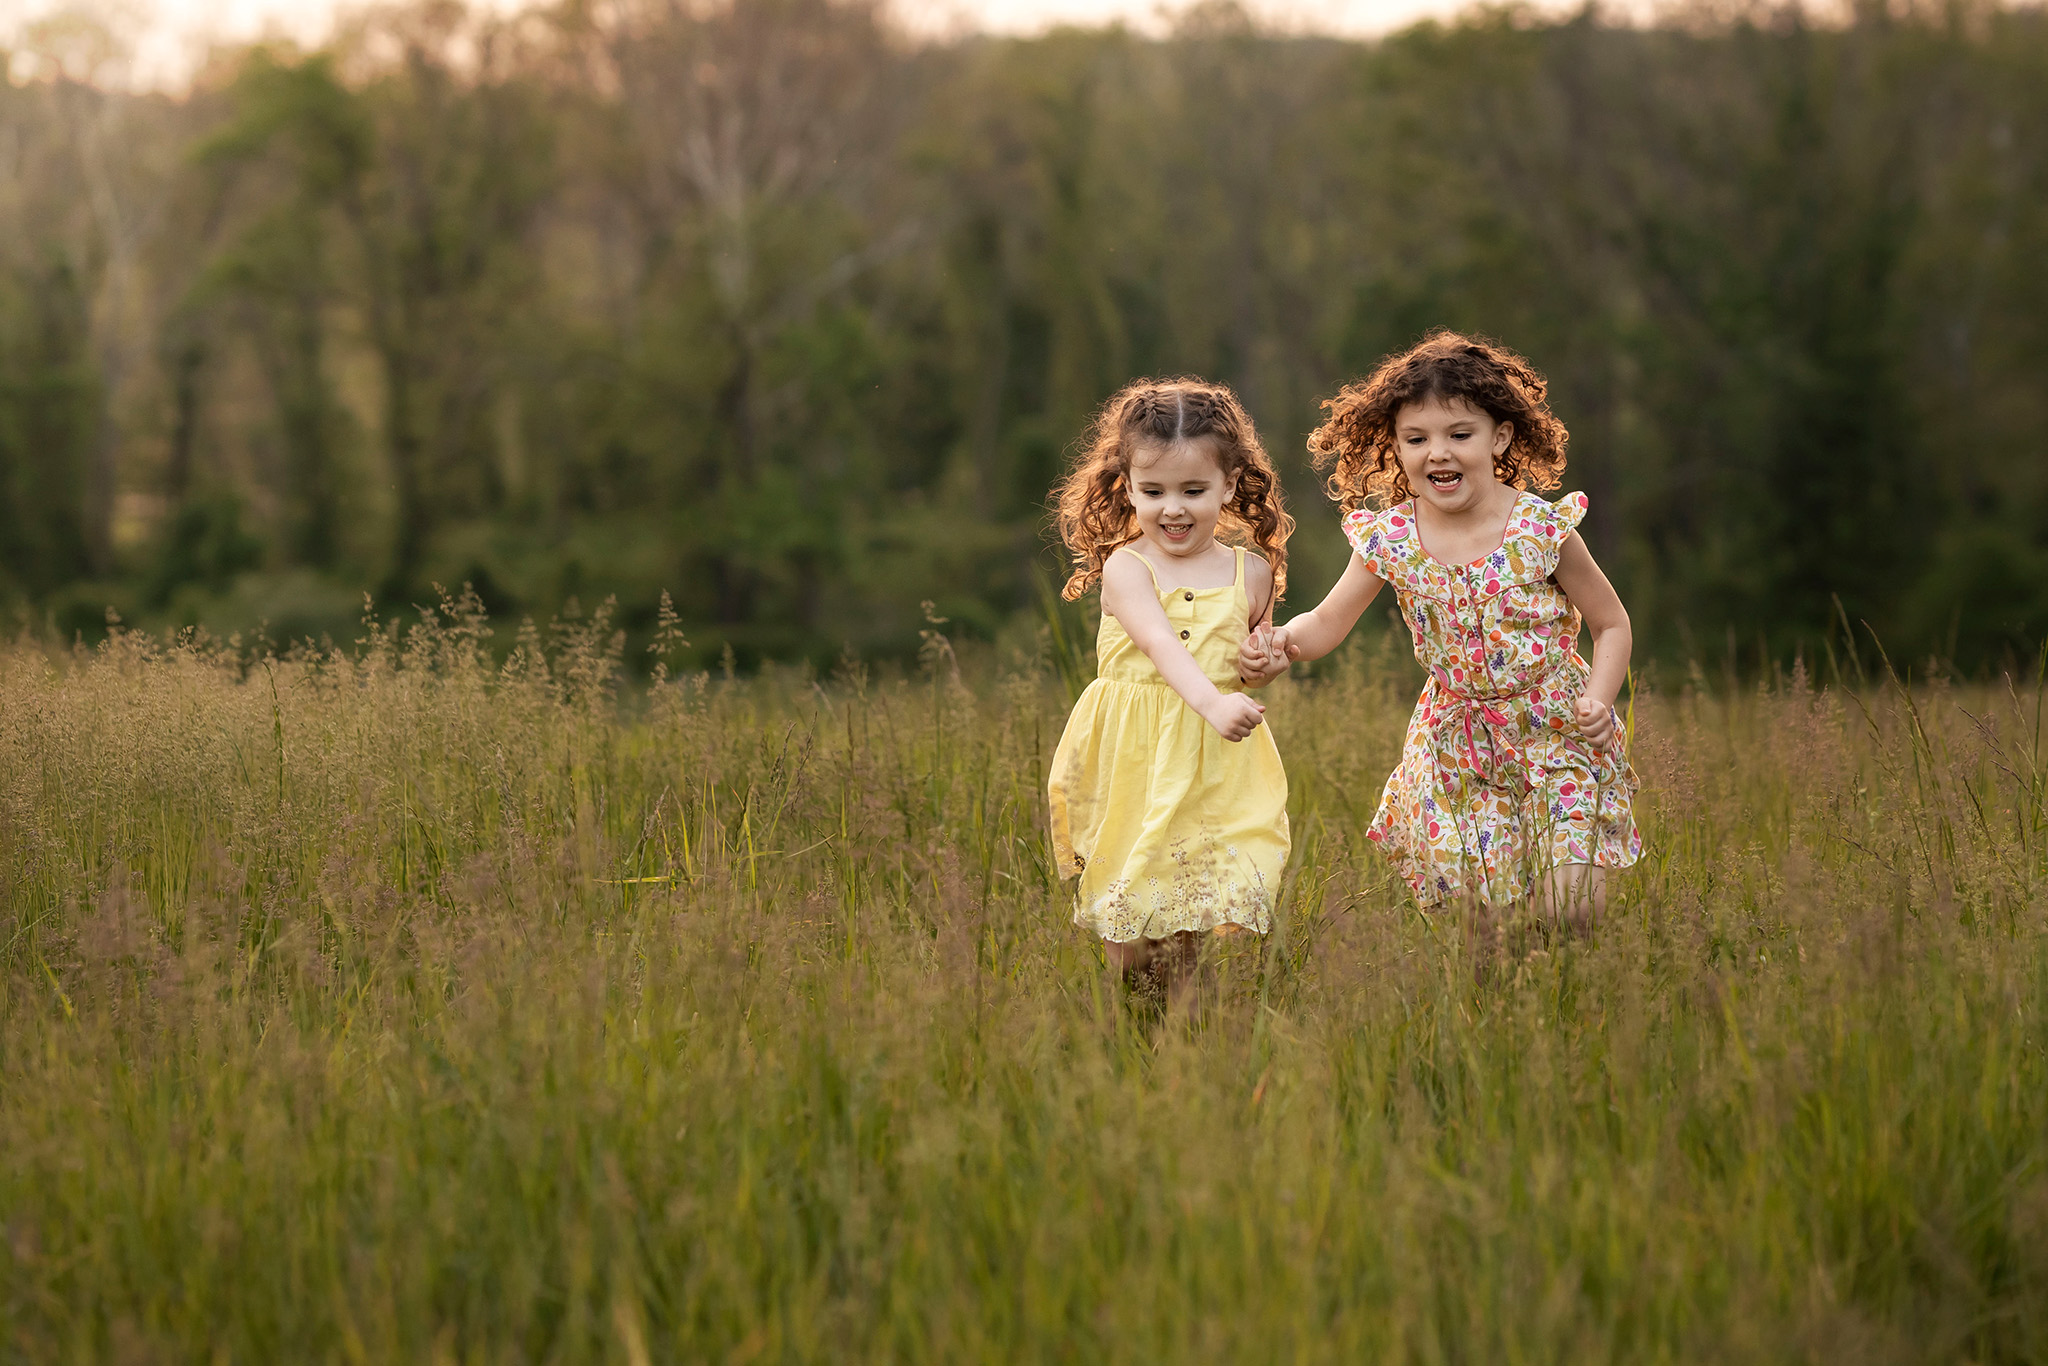 Two sisters running through a field